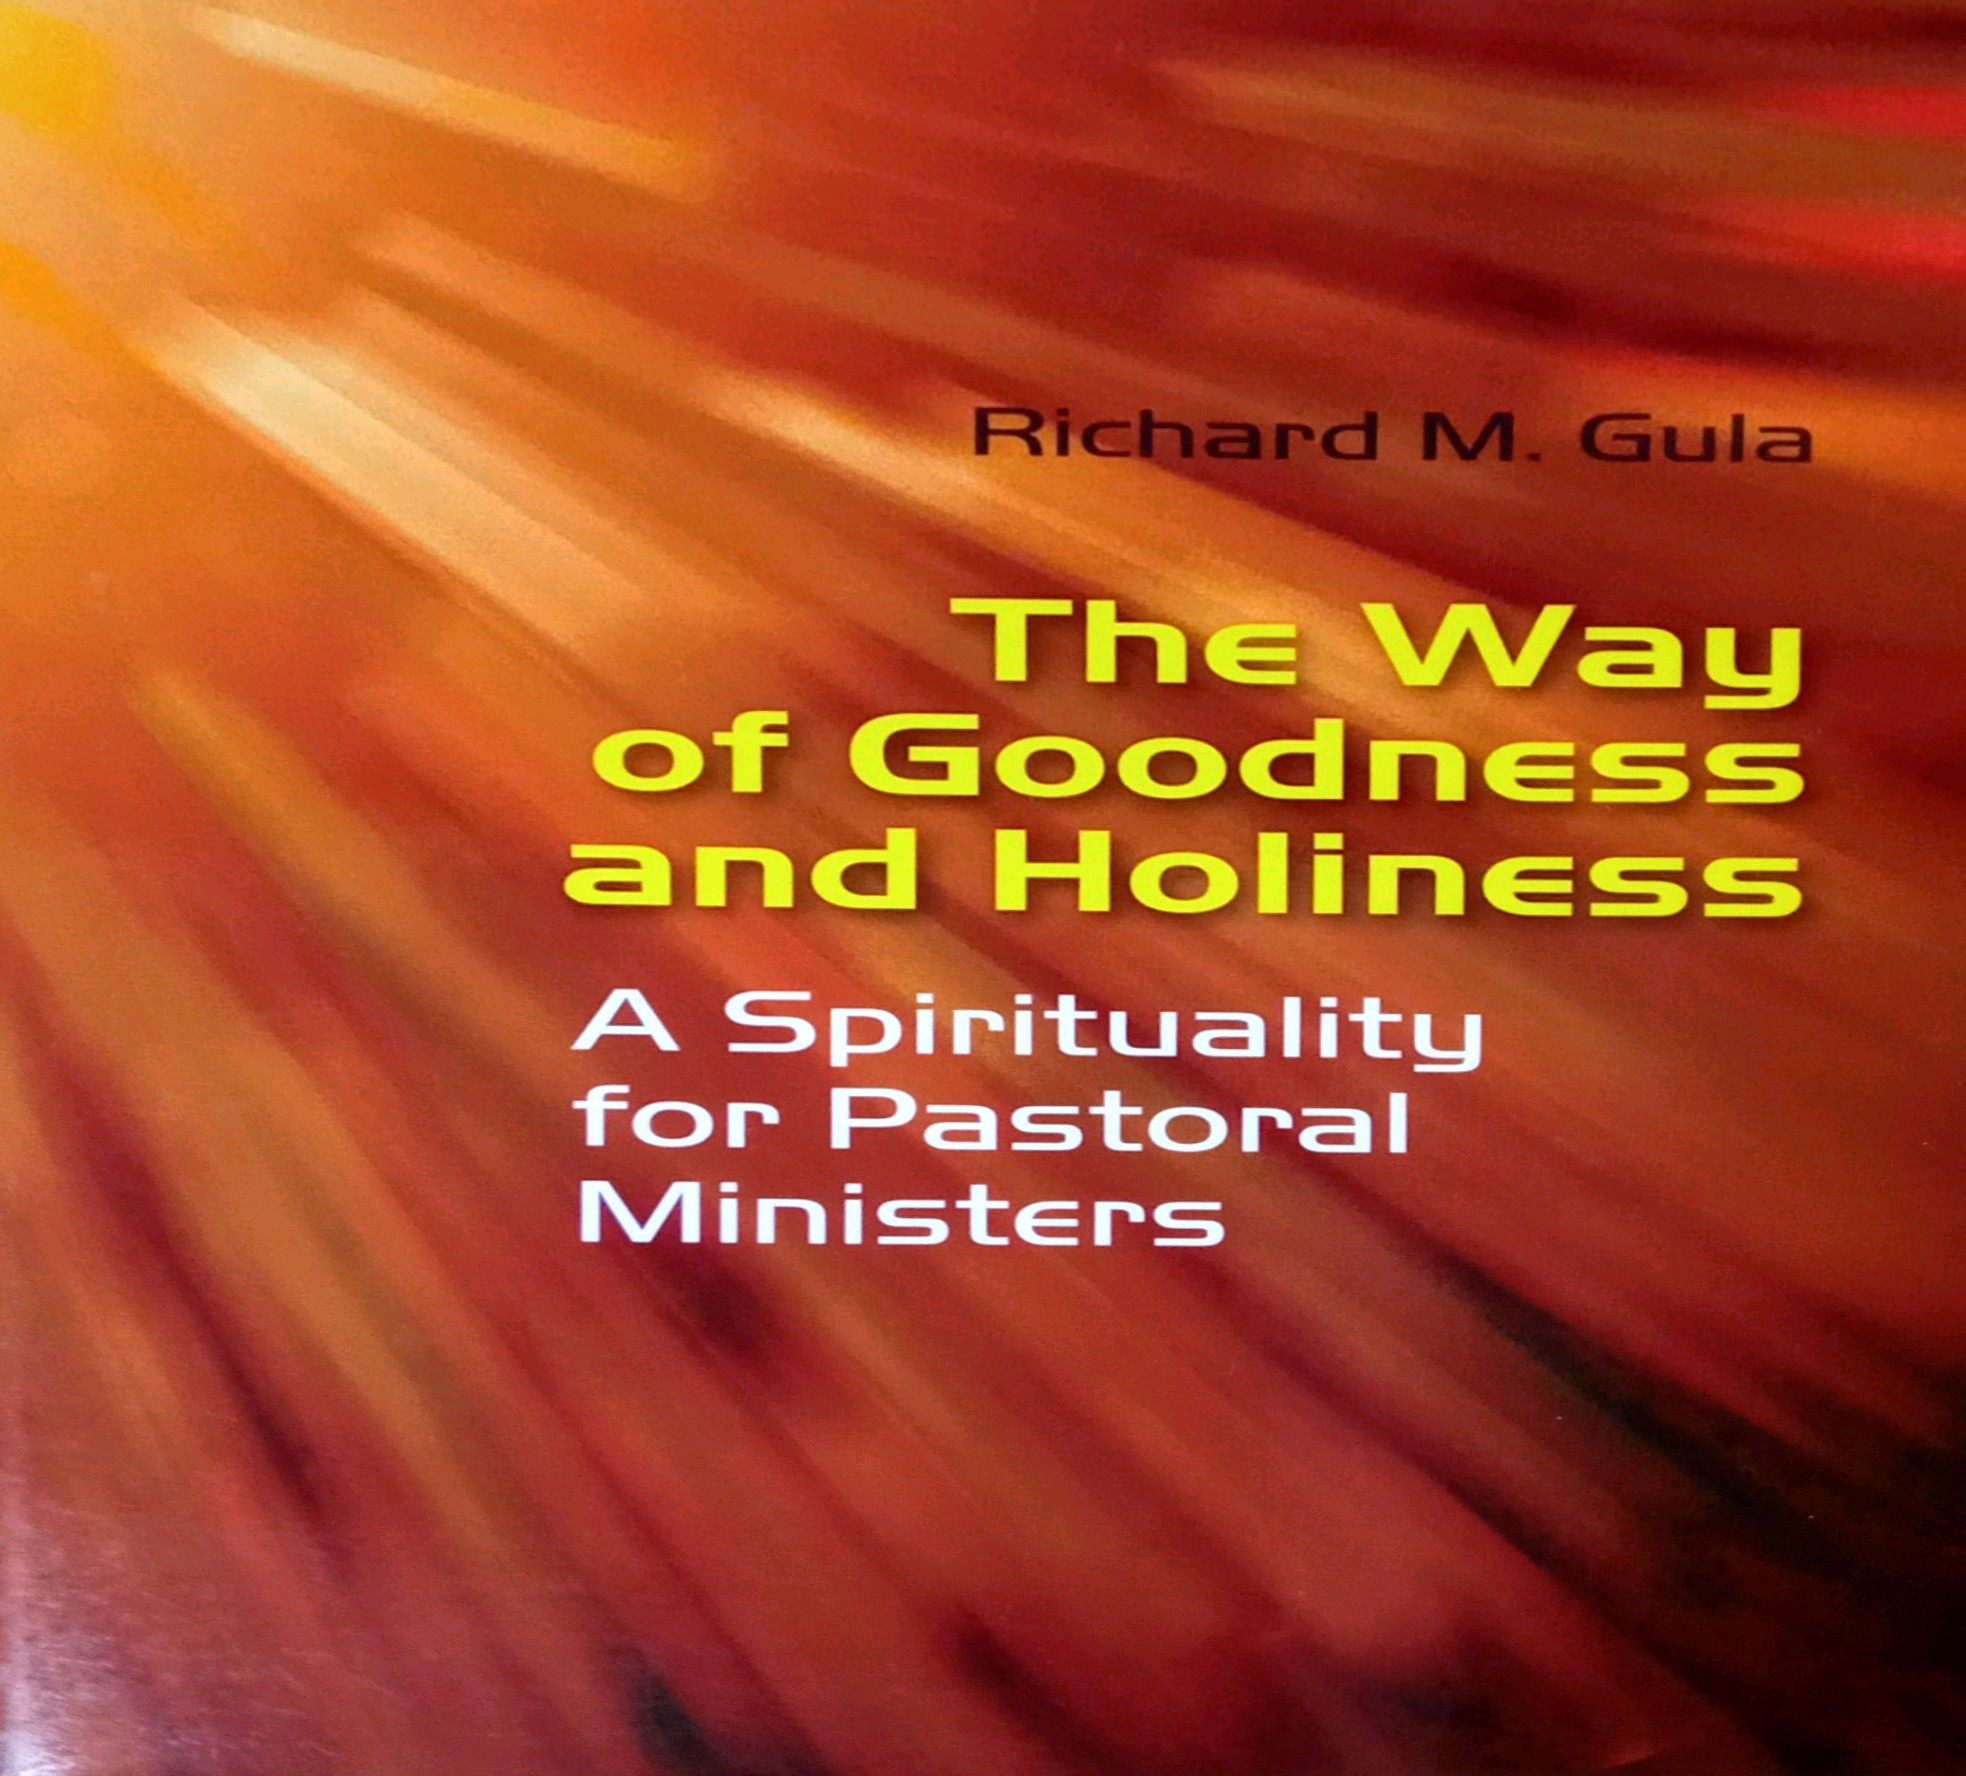 THE WAY OF GOODNESS AND HOLINESS